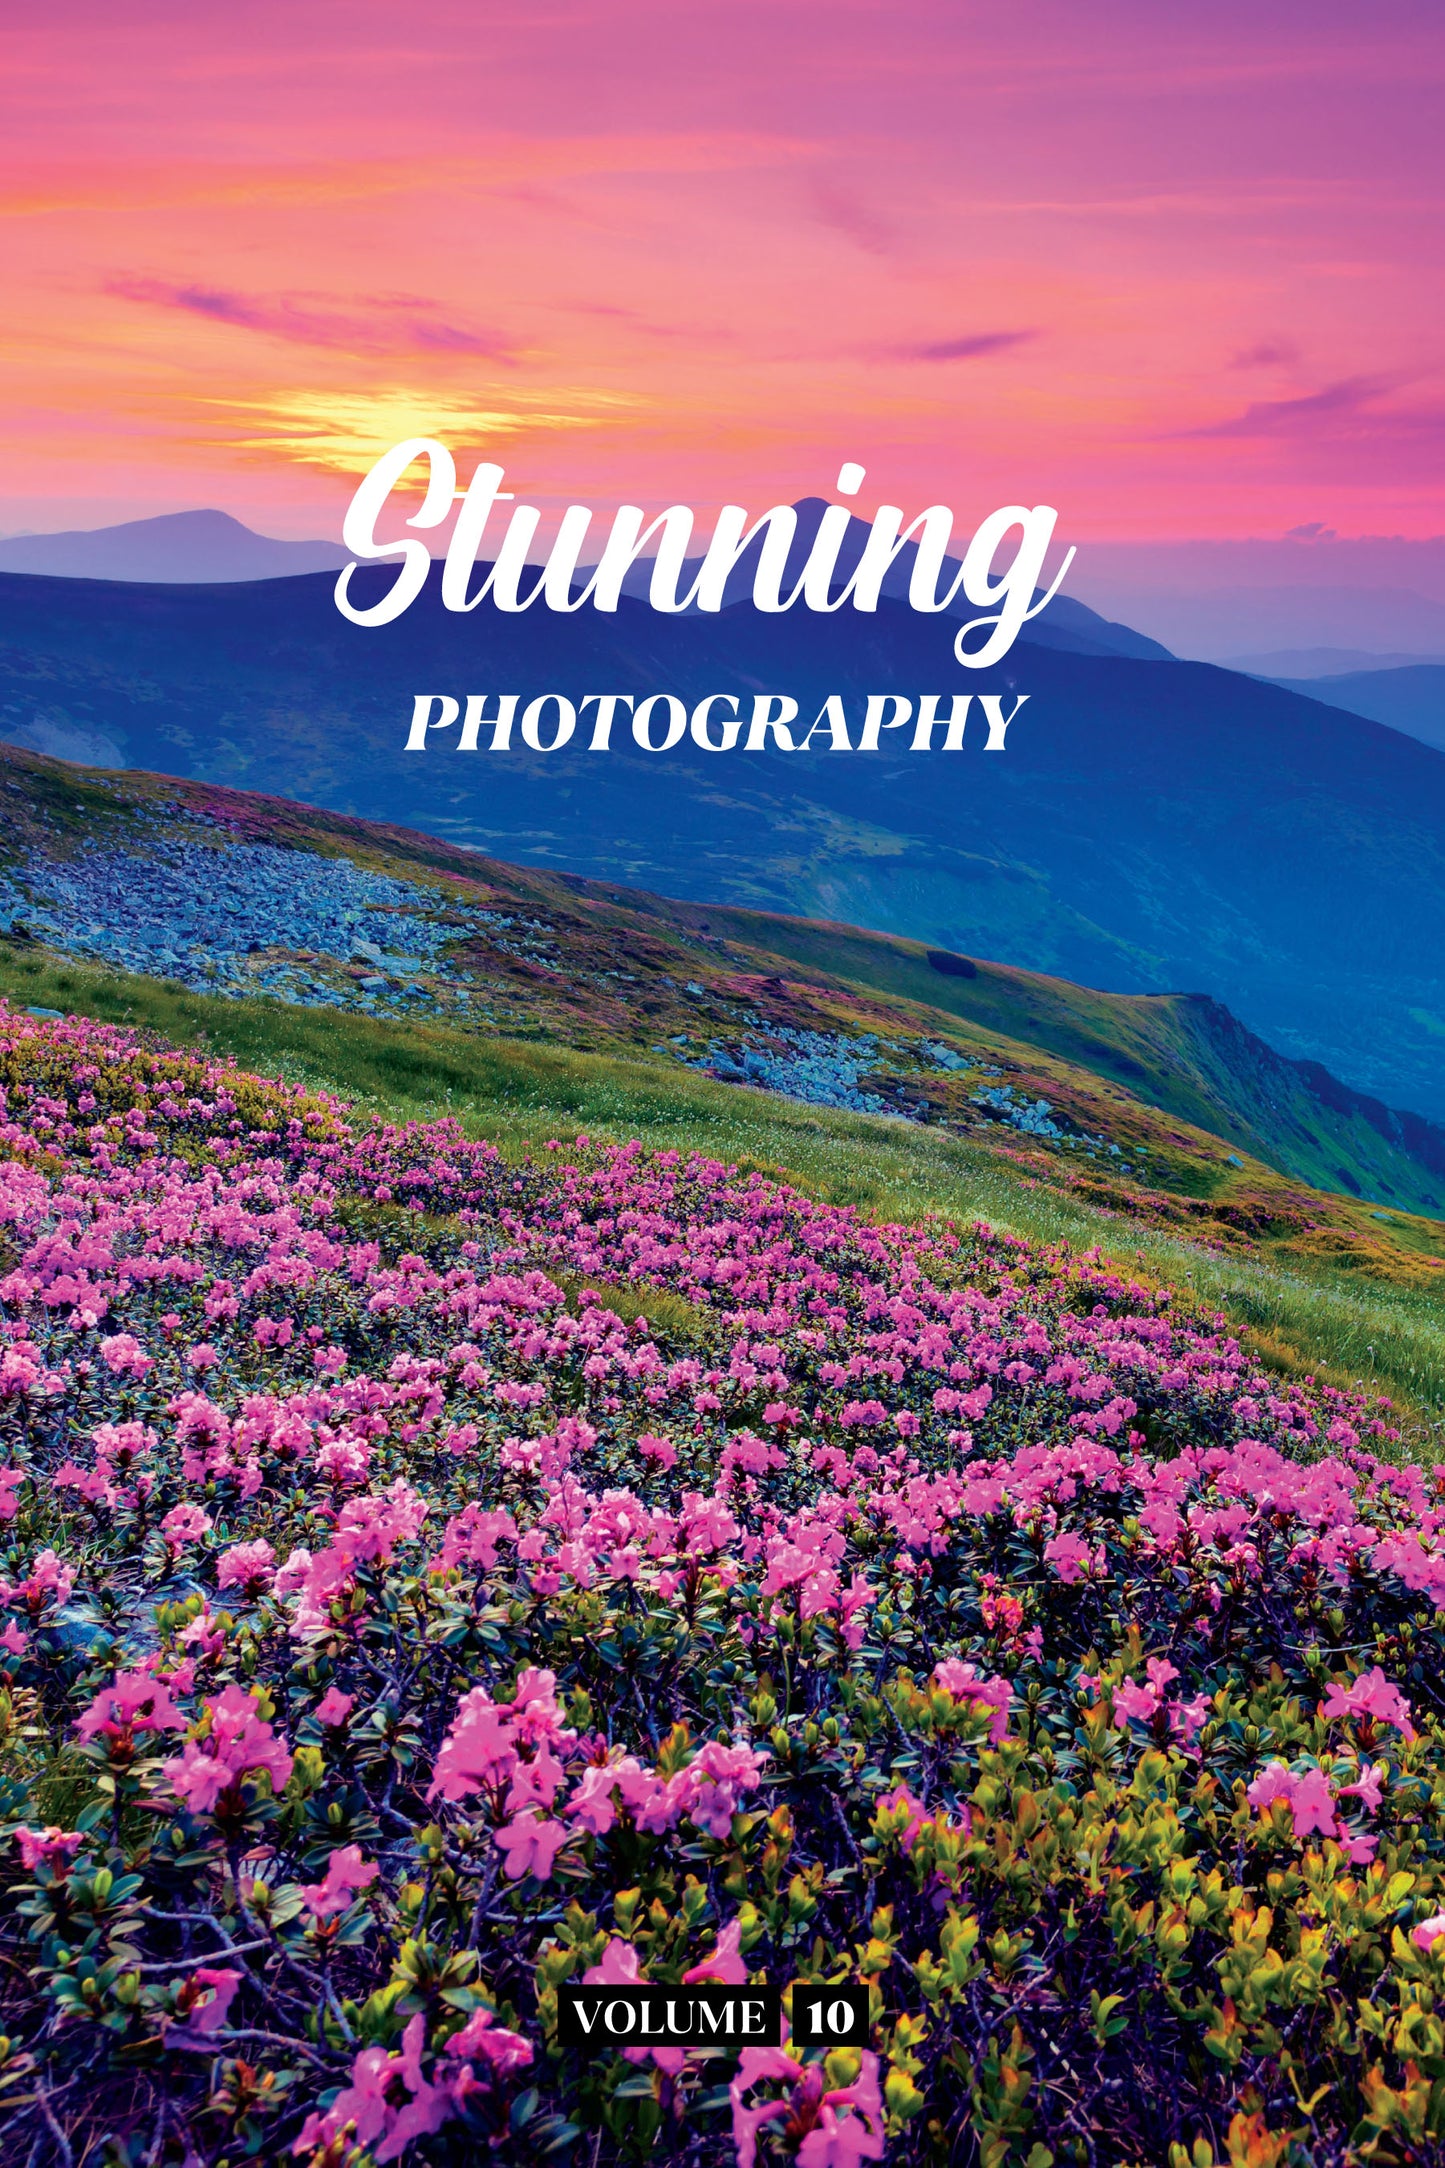 Stunning Photography Volume 10 (Physical Book)